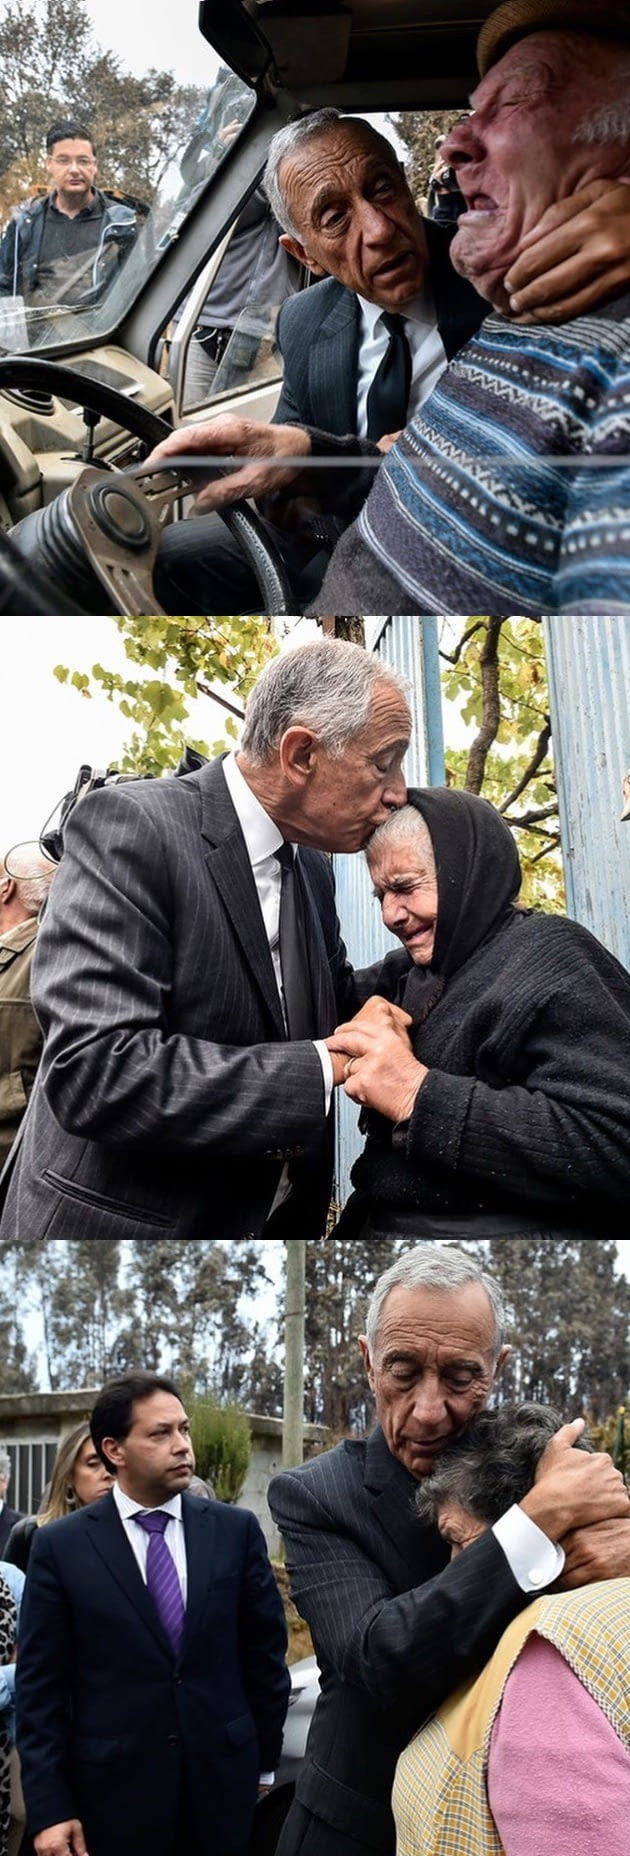 Portuguese president comforts people who have lost their homes - Politics, Emotions, Kindness, Longpost, Marcelo Rebelo de Sousa